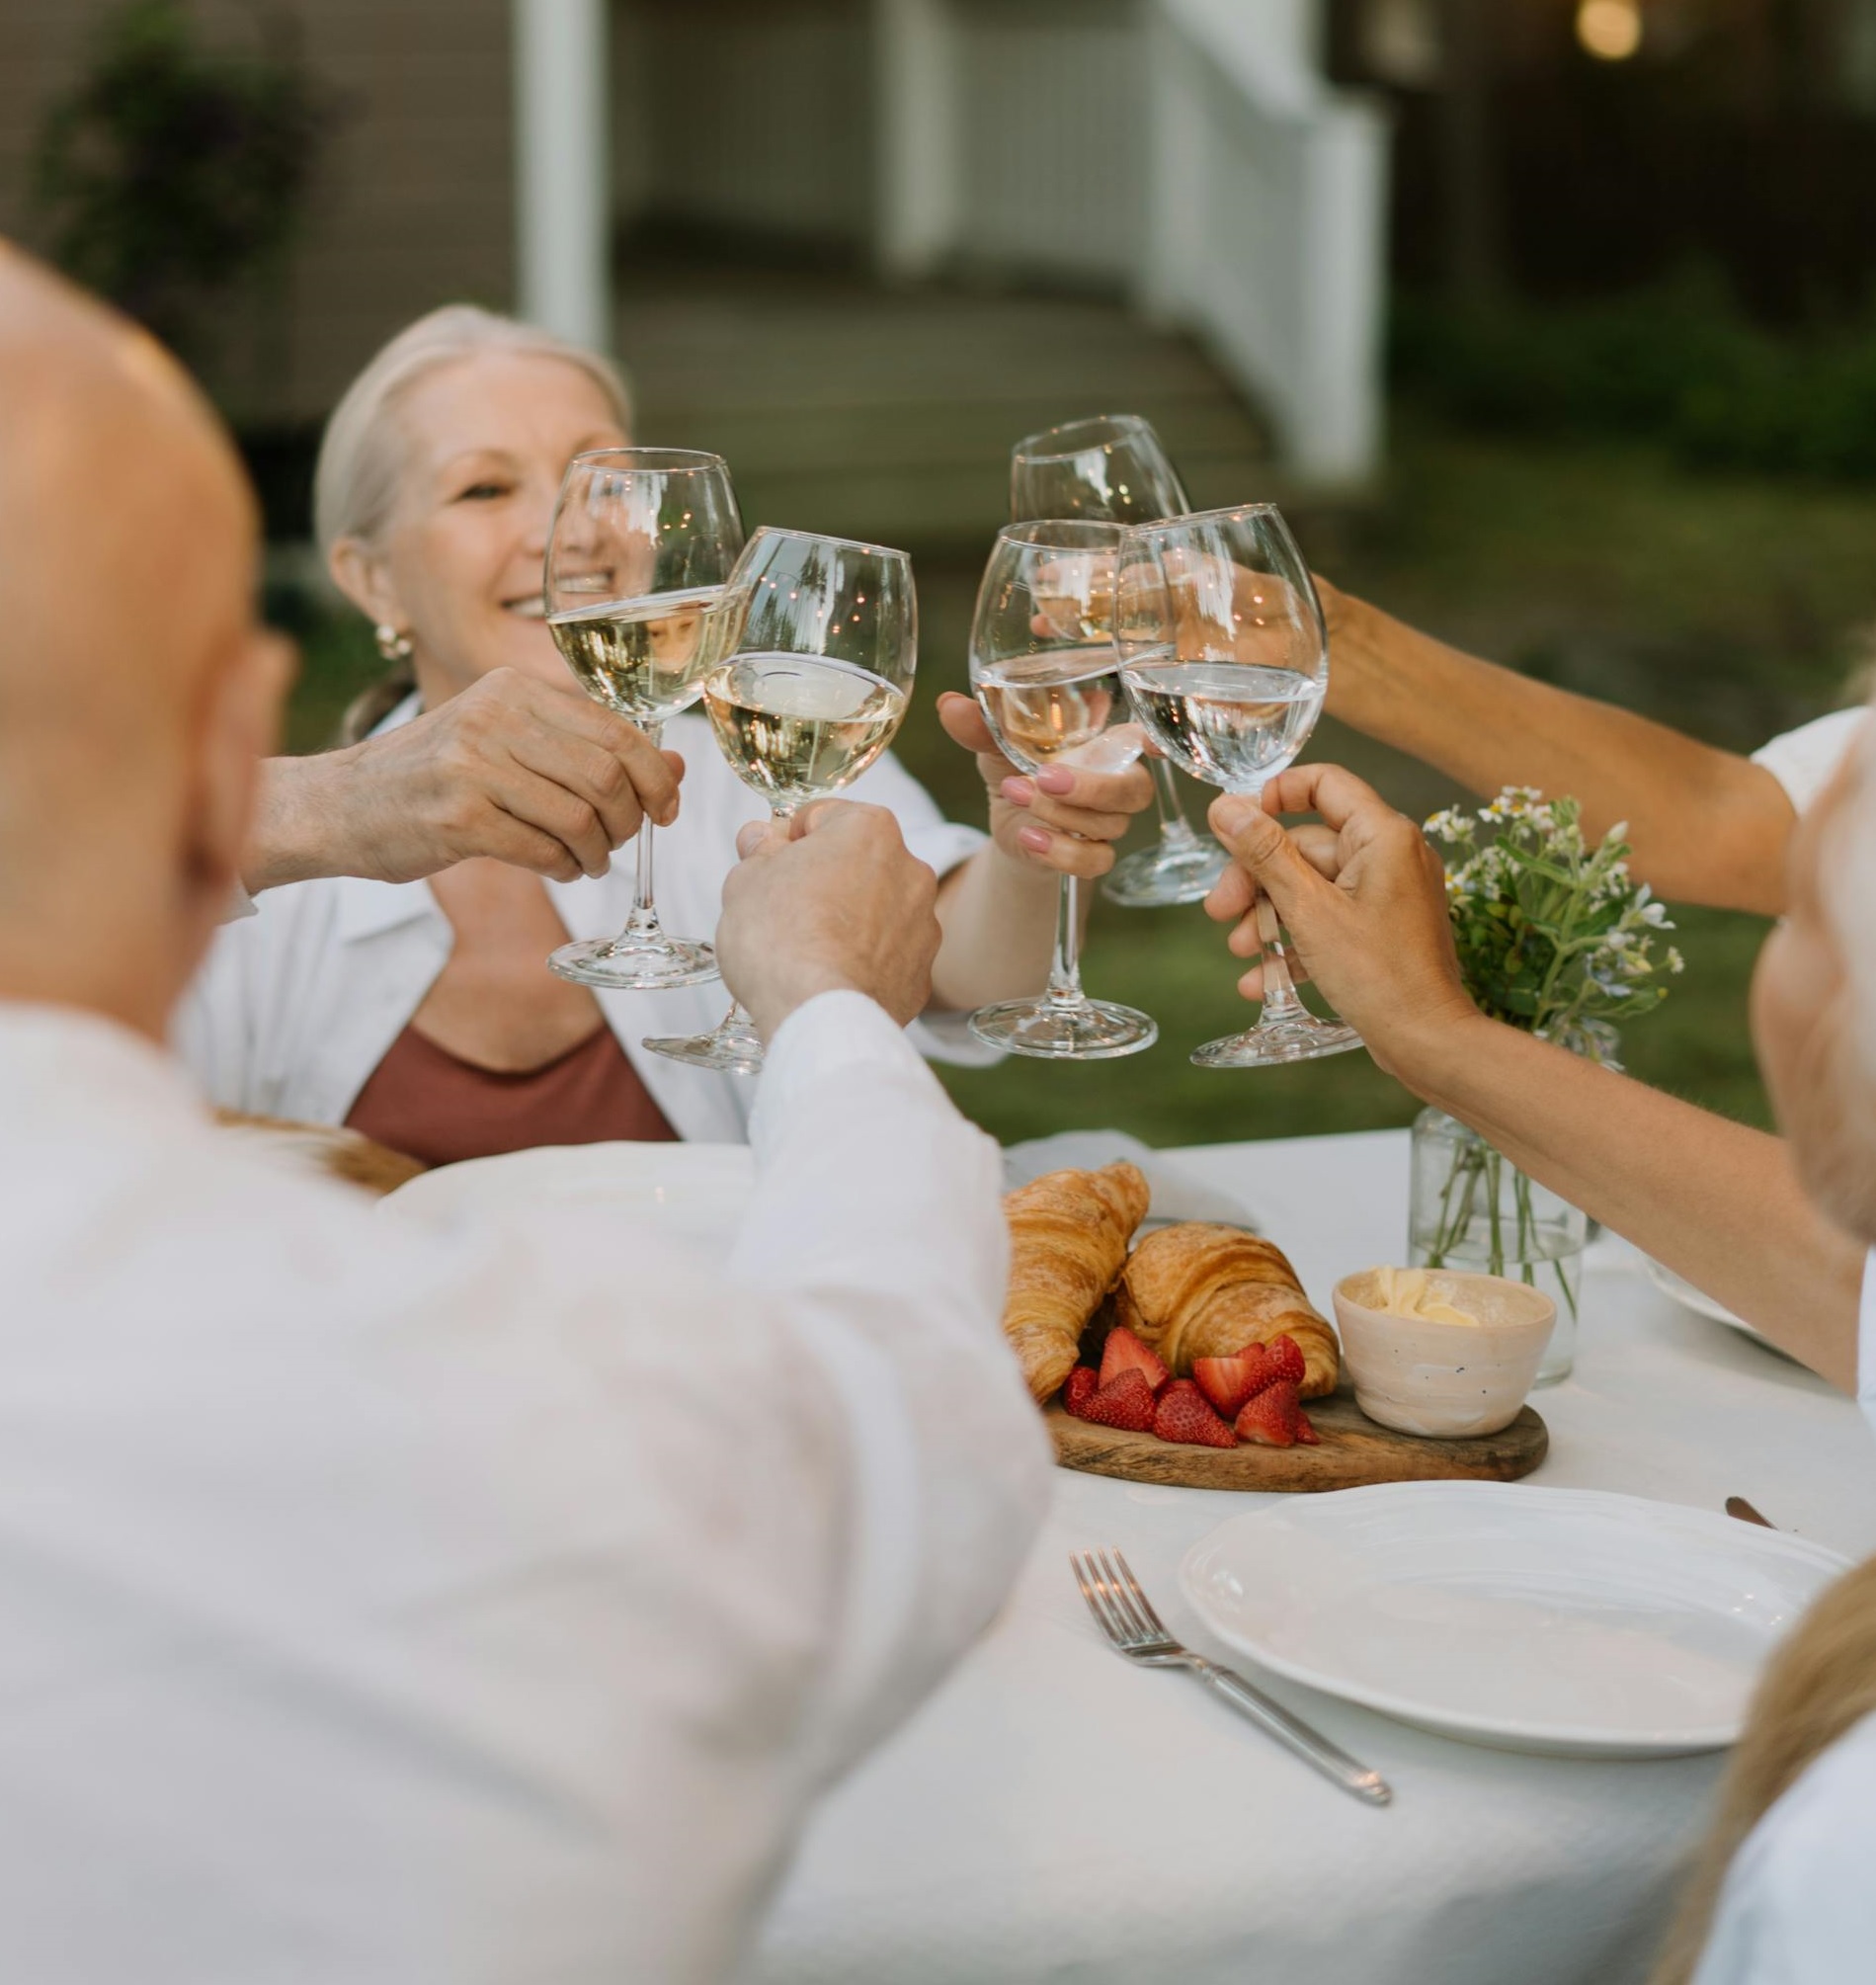 Take the initiative to host social gatherings or dinner parties in your home. Invite neighbors, coworkers, or acquaintances you've met through other activities, providing a relaxed and welcoming setting for fostering connections and building friendships. :: Pexels